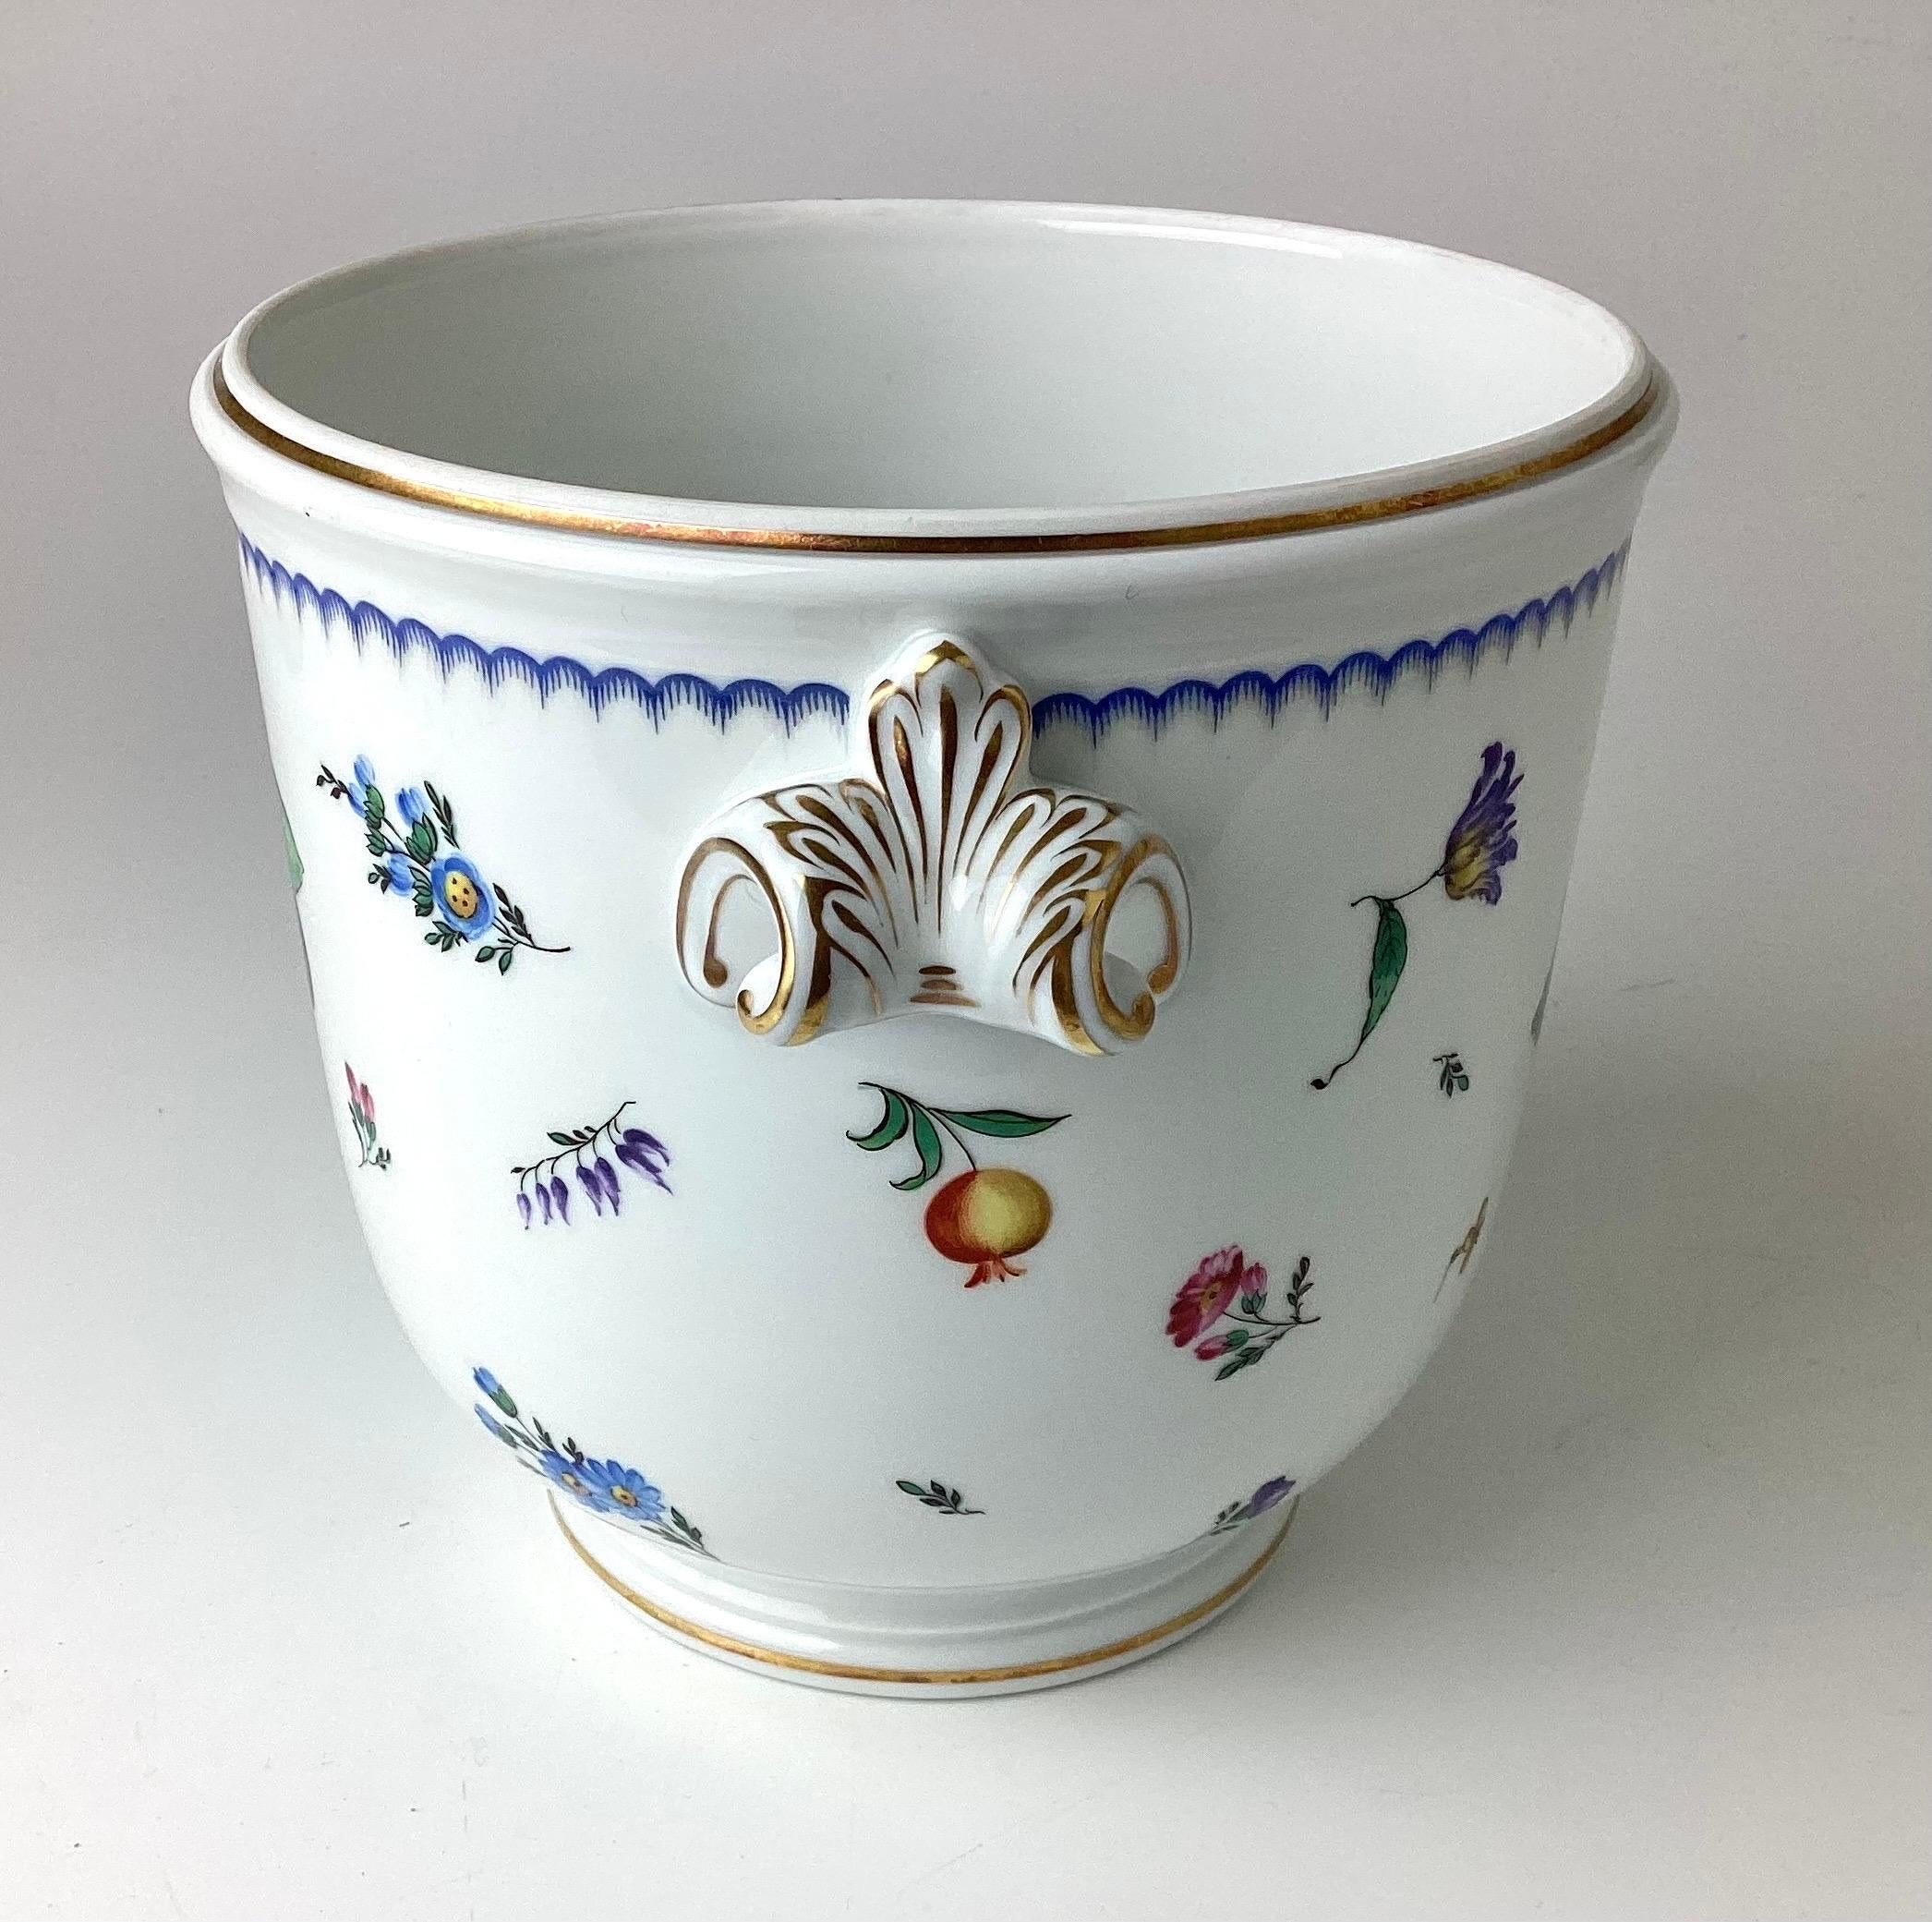 A fine bone china decorative and pretty piece by the re known Italian porcelain firm of Ginori. Hand-painted botanicals and 24-karat gilt trim highlight this piece. Impressive in size and could also be used for a centerpiece, ice bucket or a lovely